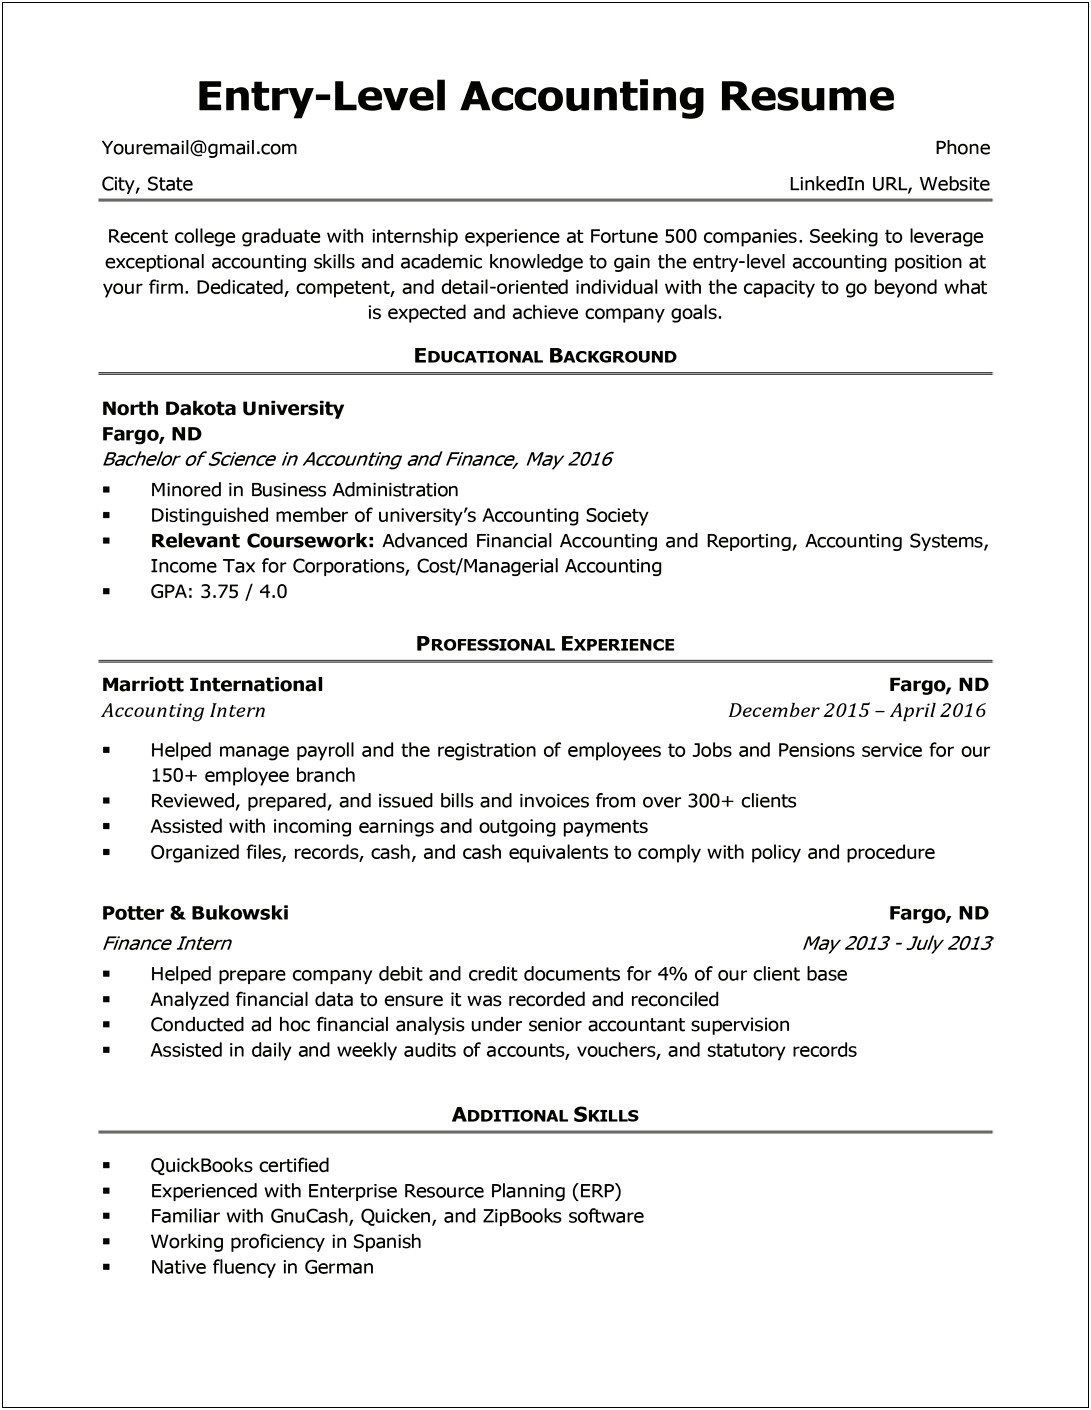 Entry Level Accounting Resume With Insurance Experience